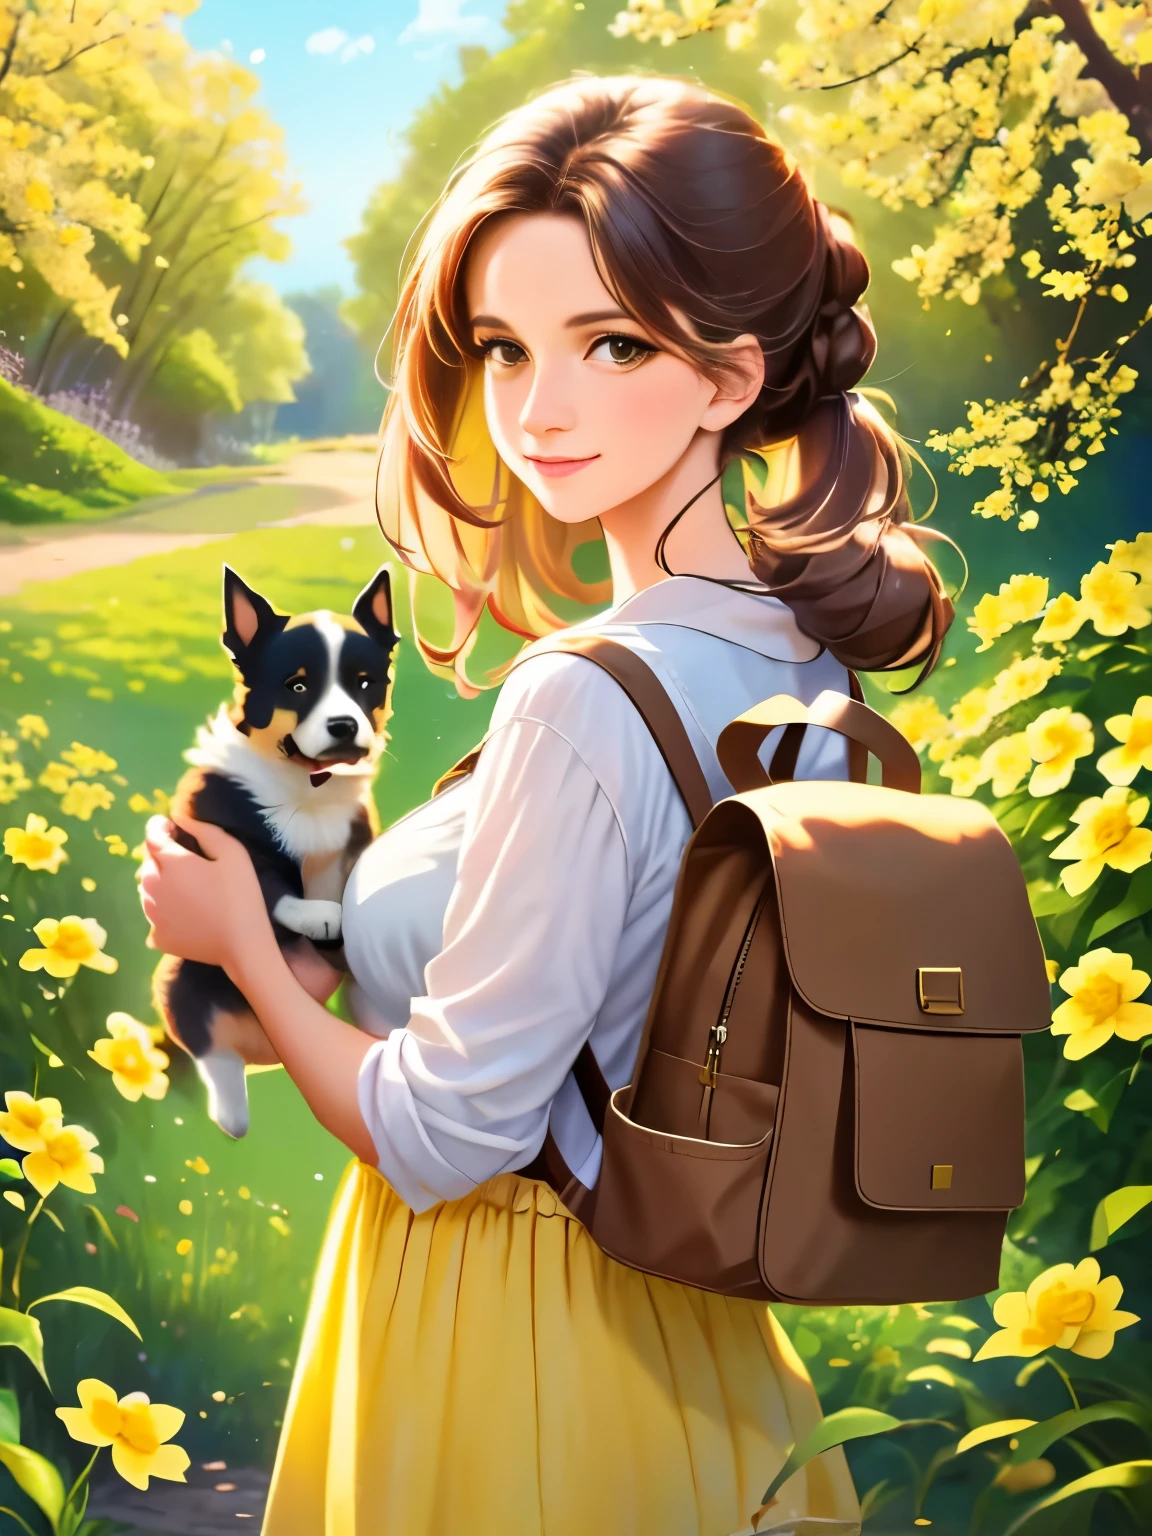 Tip: A very charming  with a backpack and her cute puppy enjoying a lovely spring outing surrounded by beautiful yellow flowers and nature. The illustration is a high-definition illustration in 4k resolution, featuring highly detailed facial features and cartoon-style visuals.  